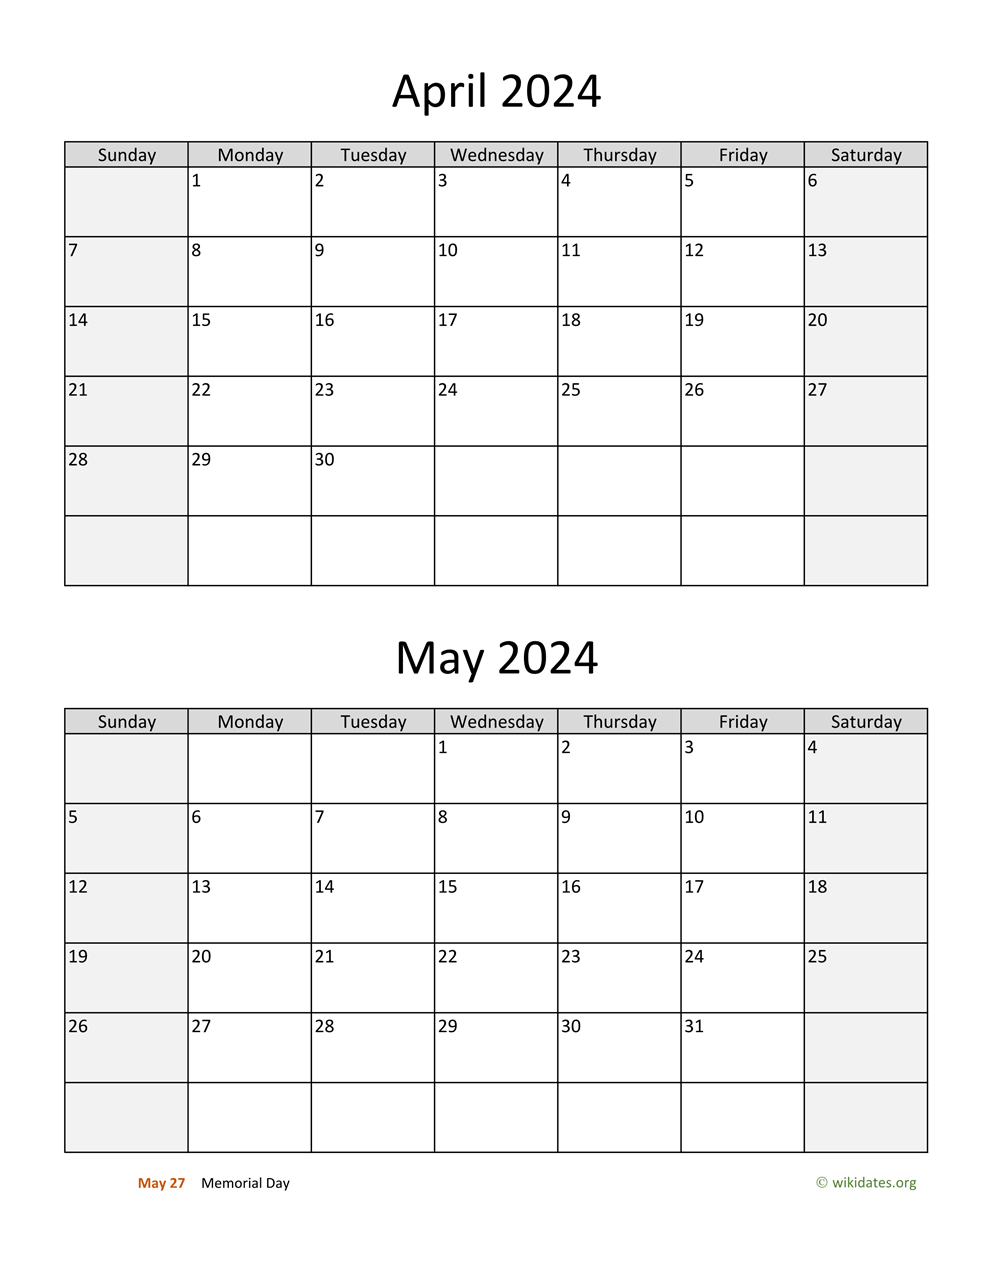 April And May 2024 Calendar | Wikidates for Calendar Printable April And May 2024